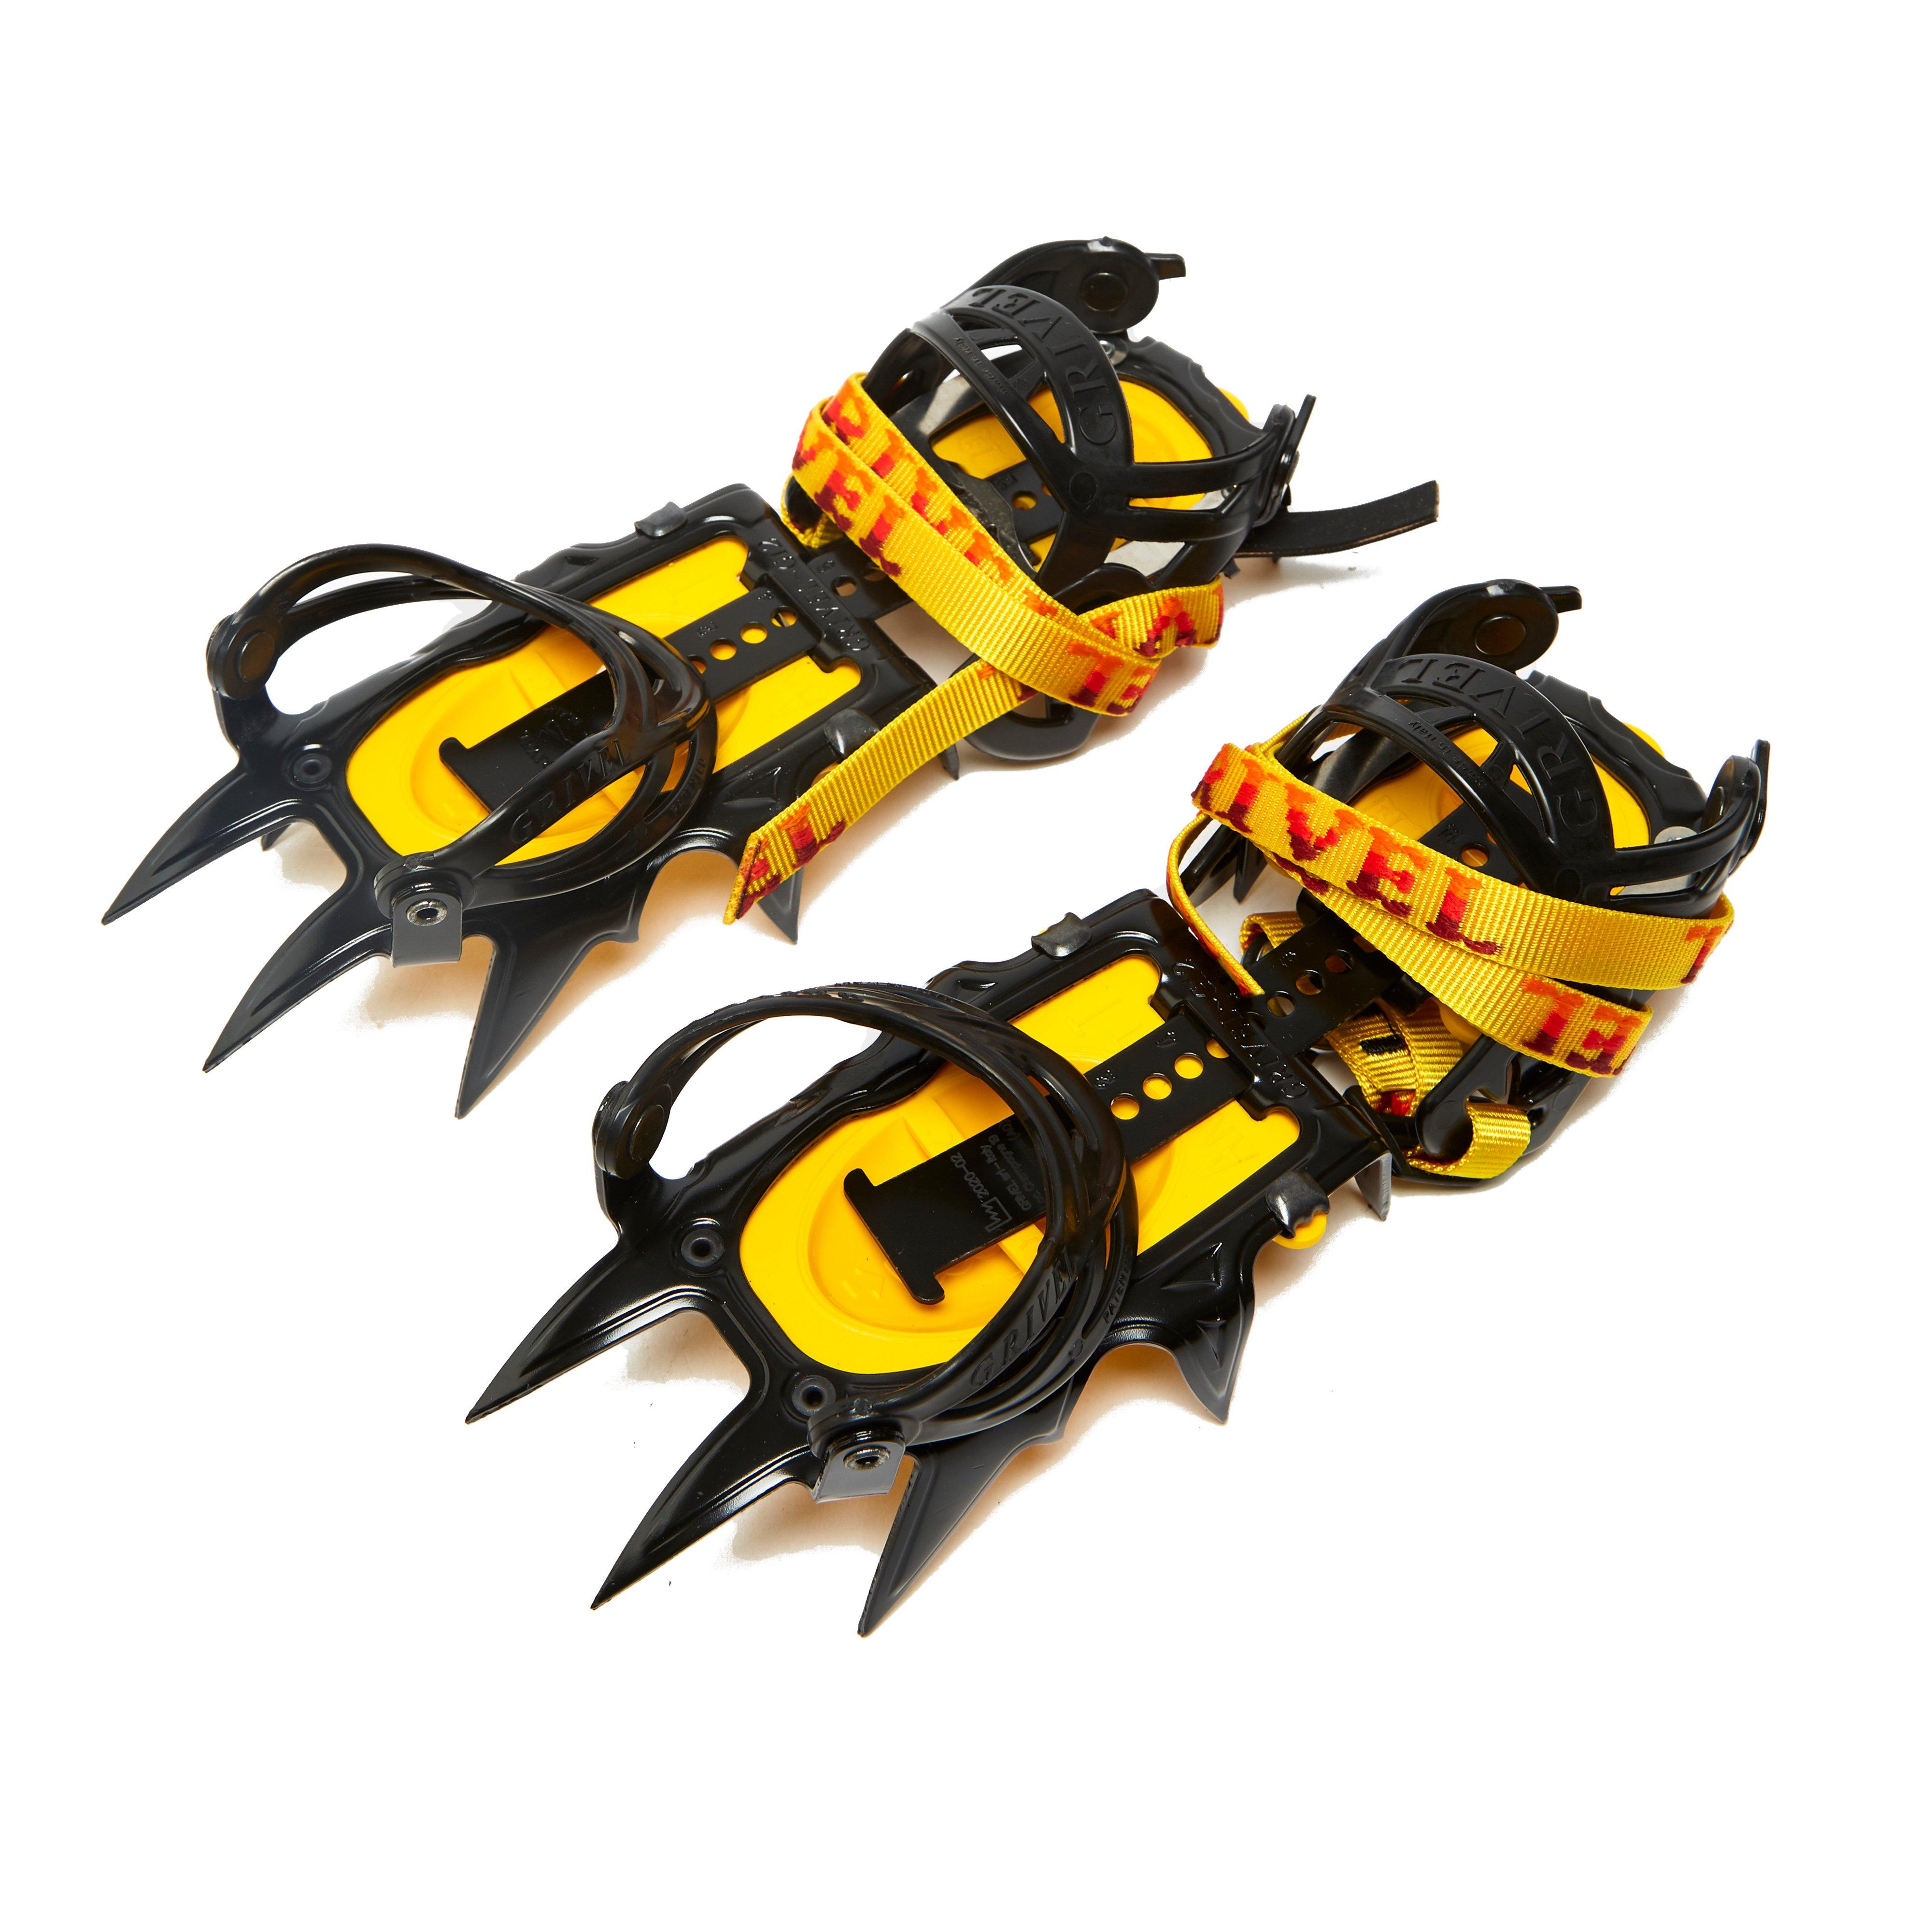 Grivel G12 New Classic Crampon Review